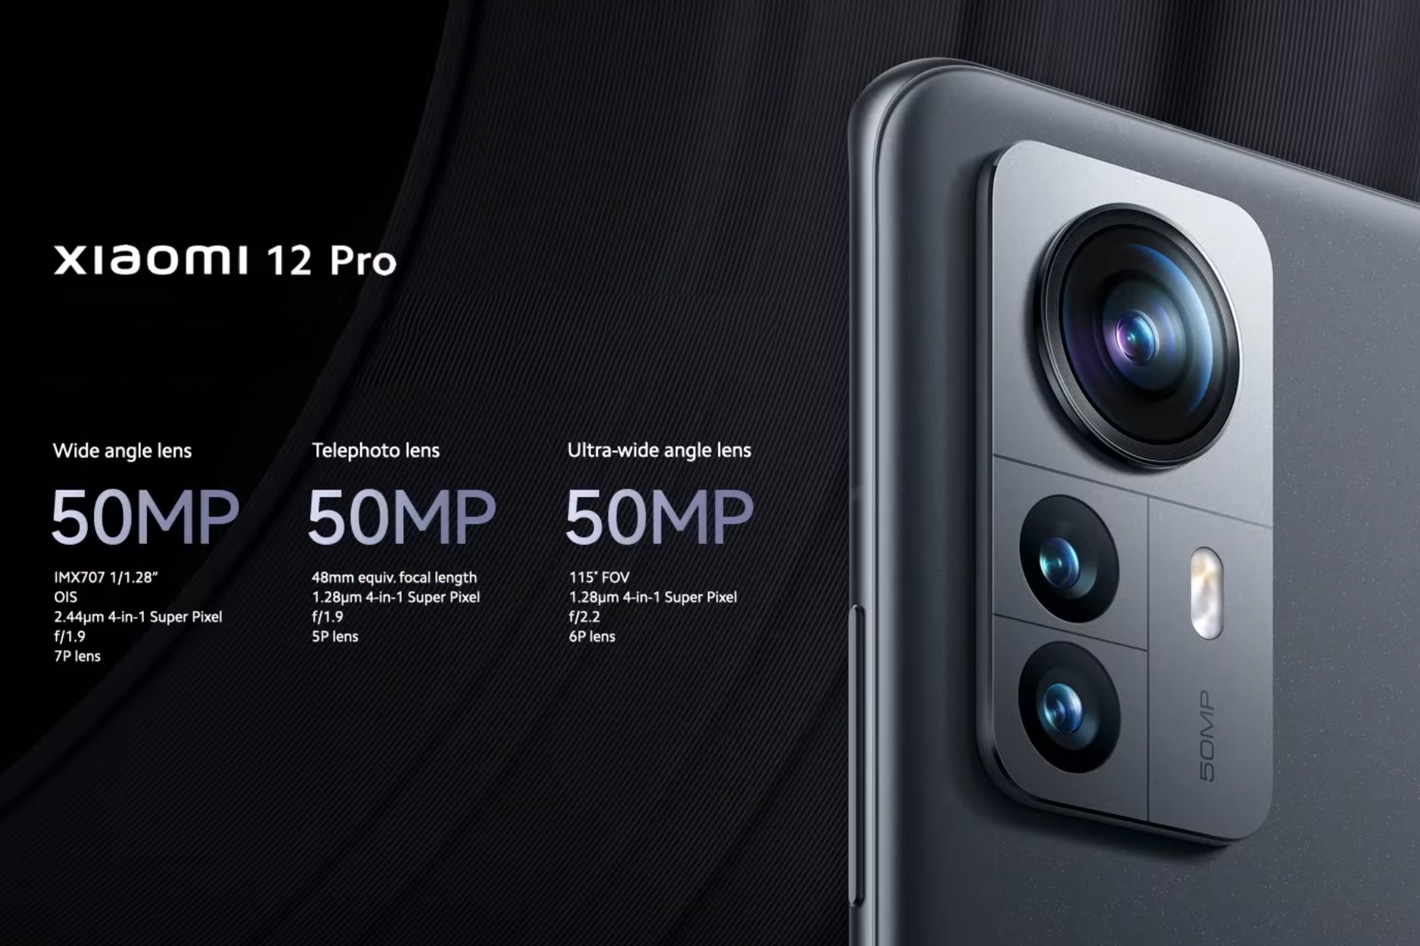 Xiaomi 12 Pro: will the triple 50MP camera array become a standard?